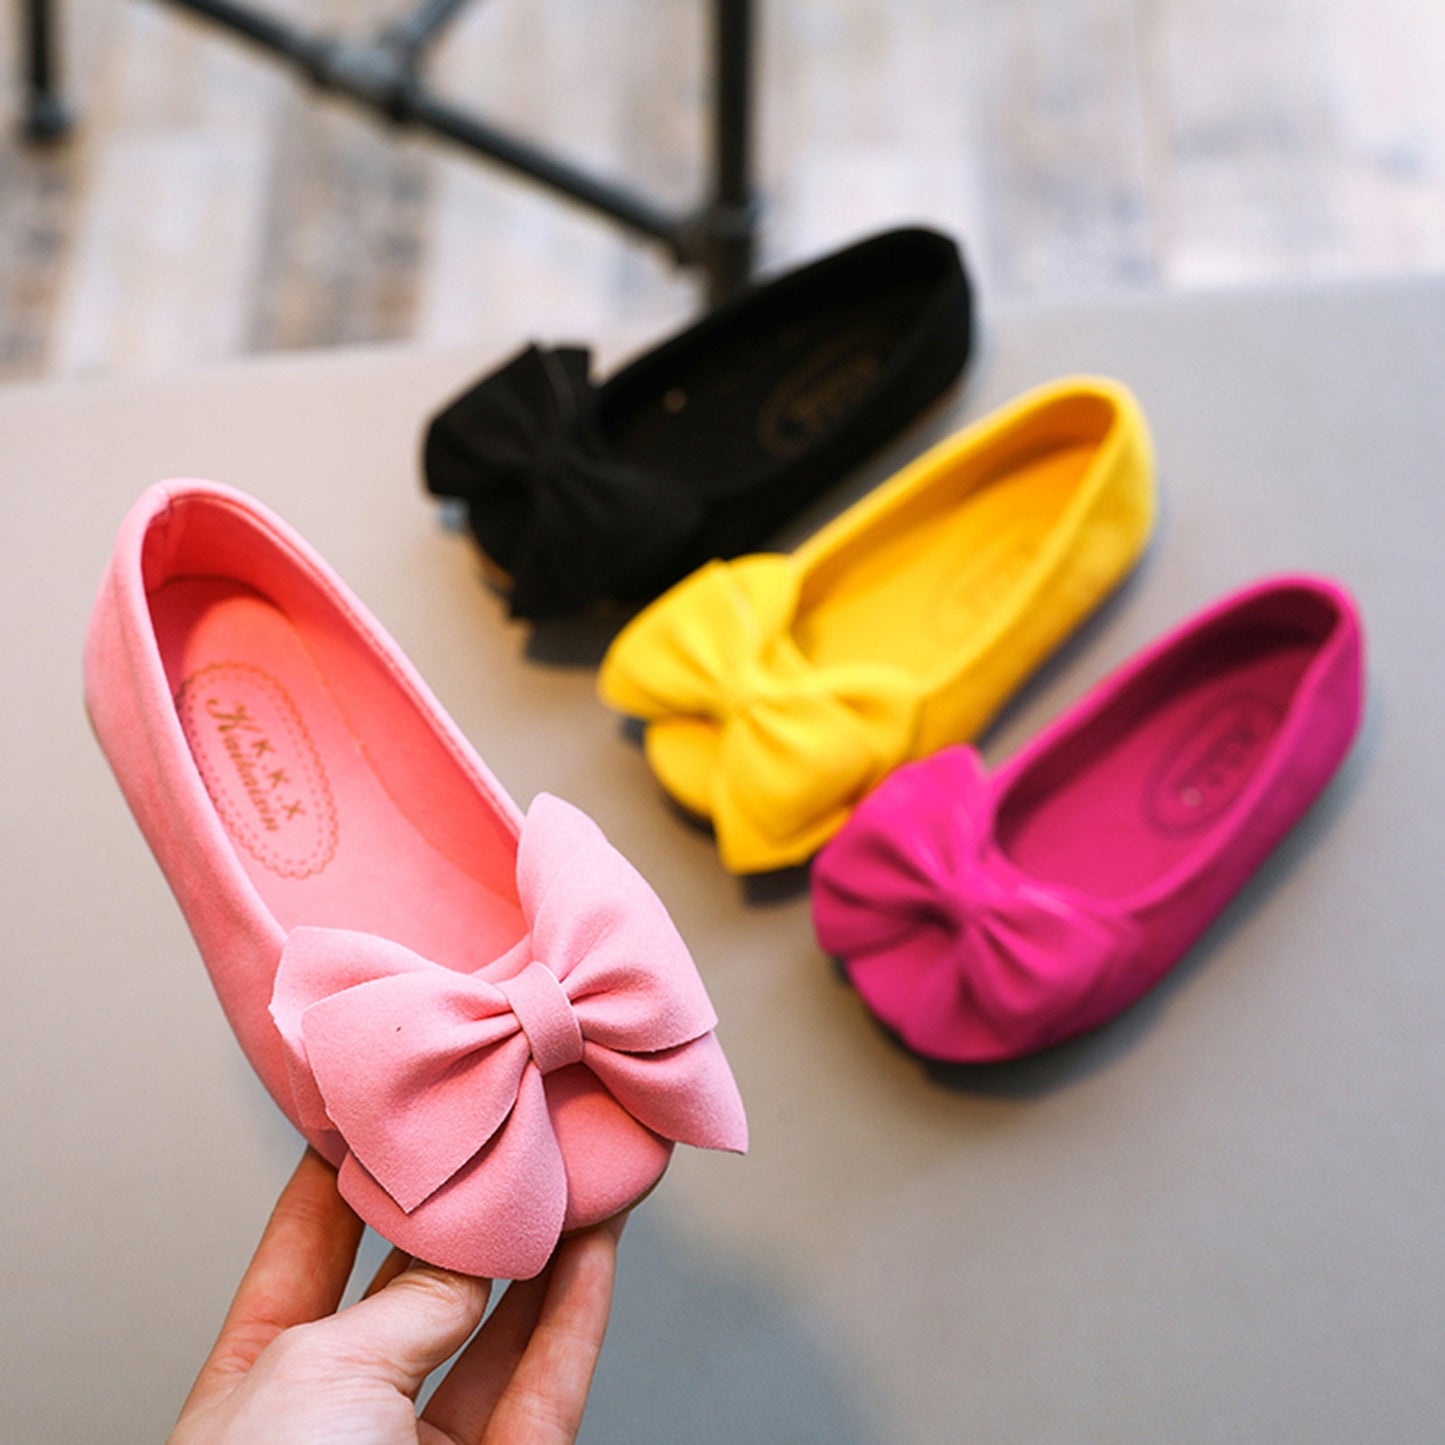 Girls Bowknot Soft Slip-on Party Dance Shoes